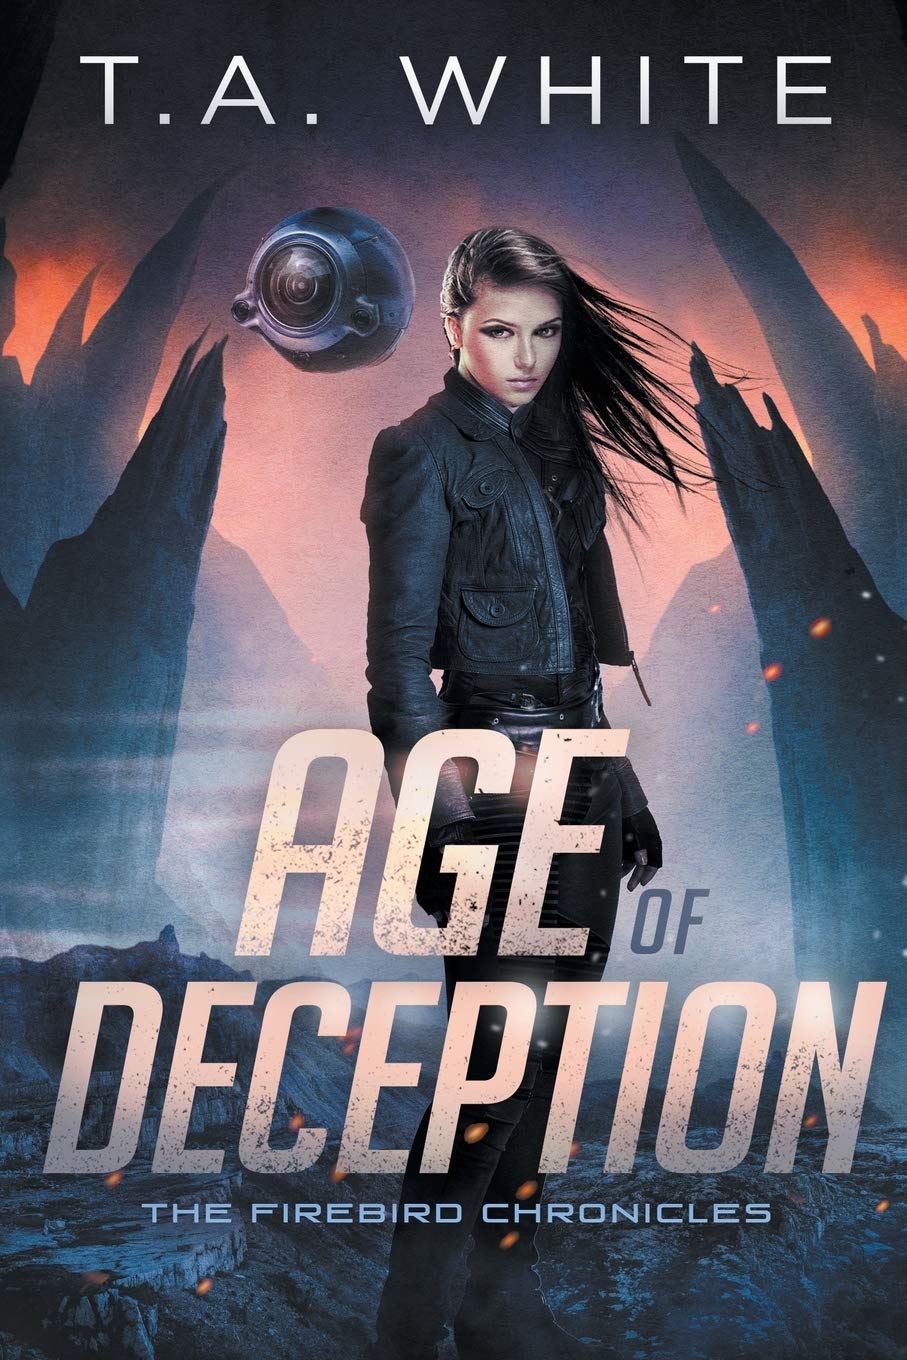 [EPUB] The Firebird Chronicles #2 Age of Deception by T.A. White